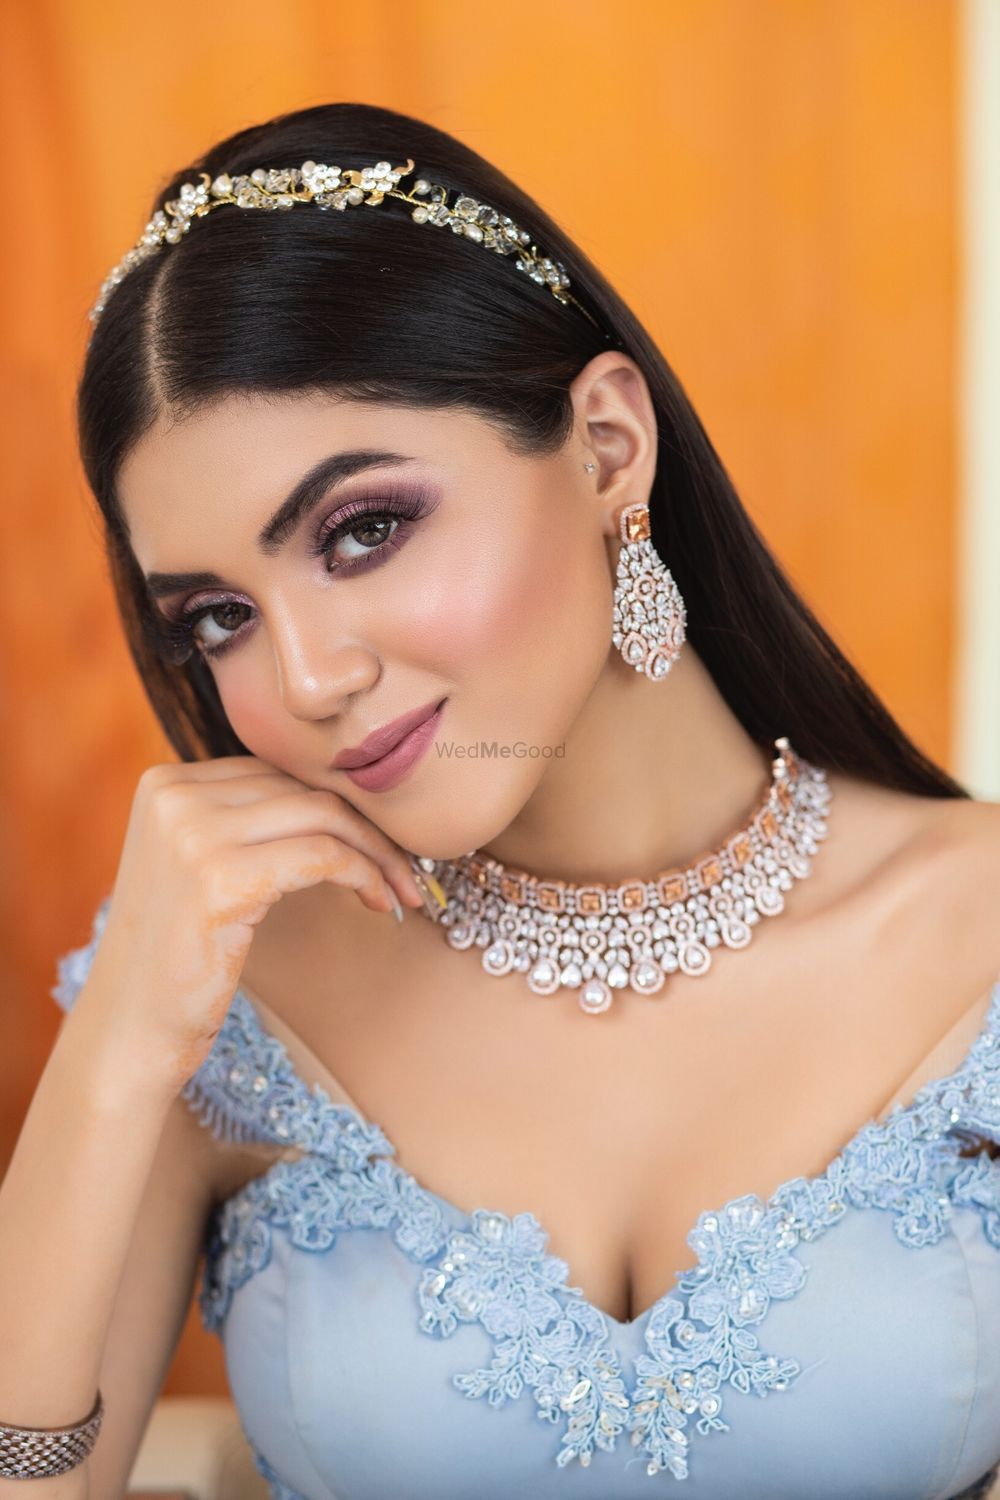 Photo of A beautiful bride in subtle makeup and jewellery on her engagement.